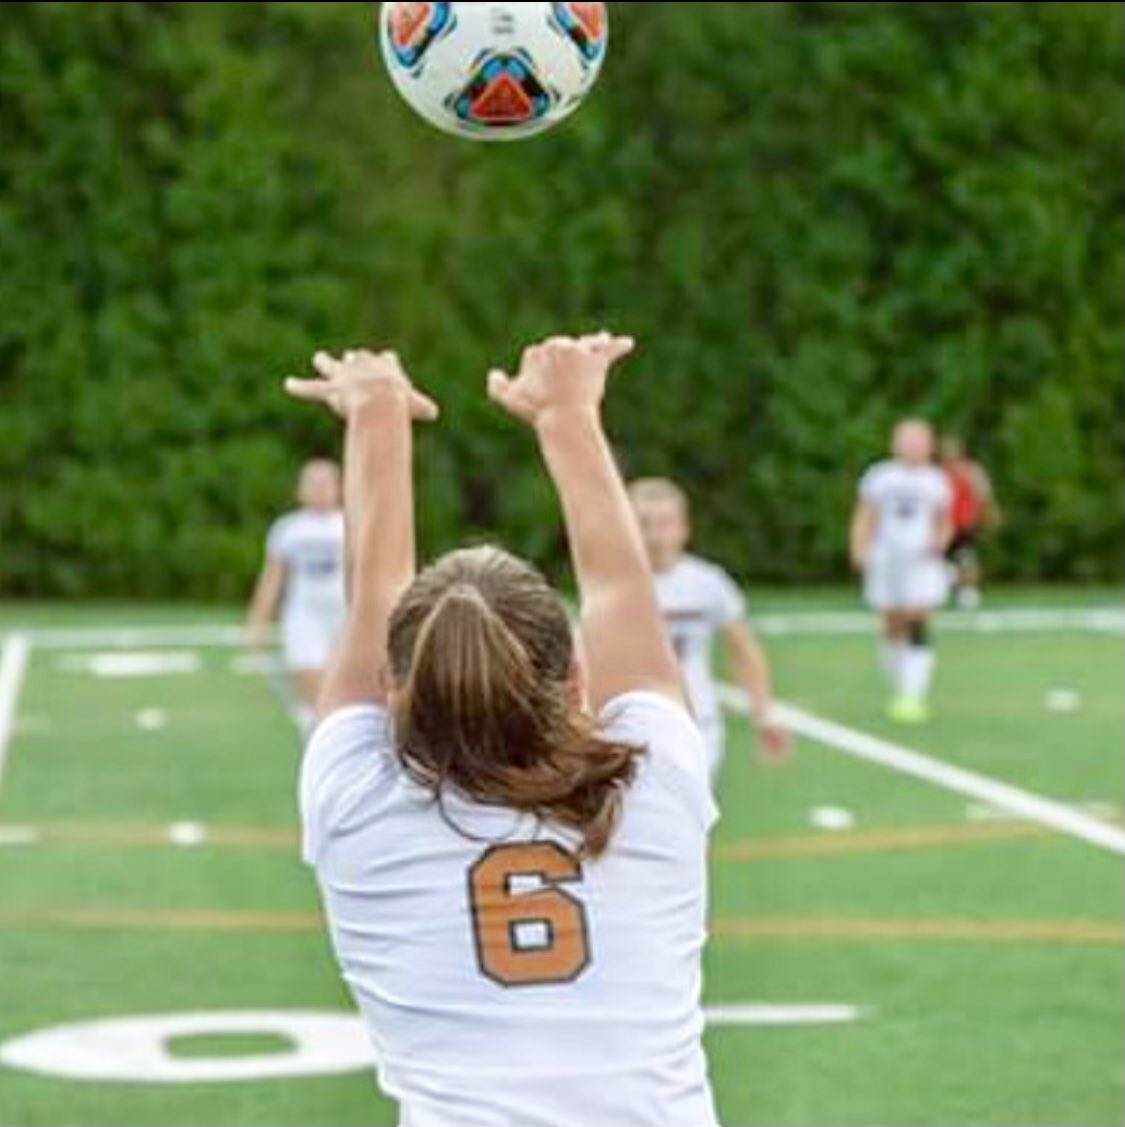 Why WU? Wednesday with Gina Bonura! “I chose @WaynesburgU because it provided me the opportunity to play soccer and major in Forensic Science. I loved playing soccer at Waynesburg because I got to both compete and have fun with my teammates that turned into a second family.”